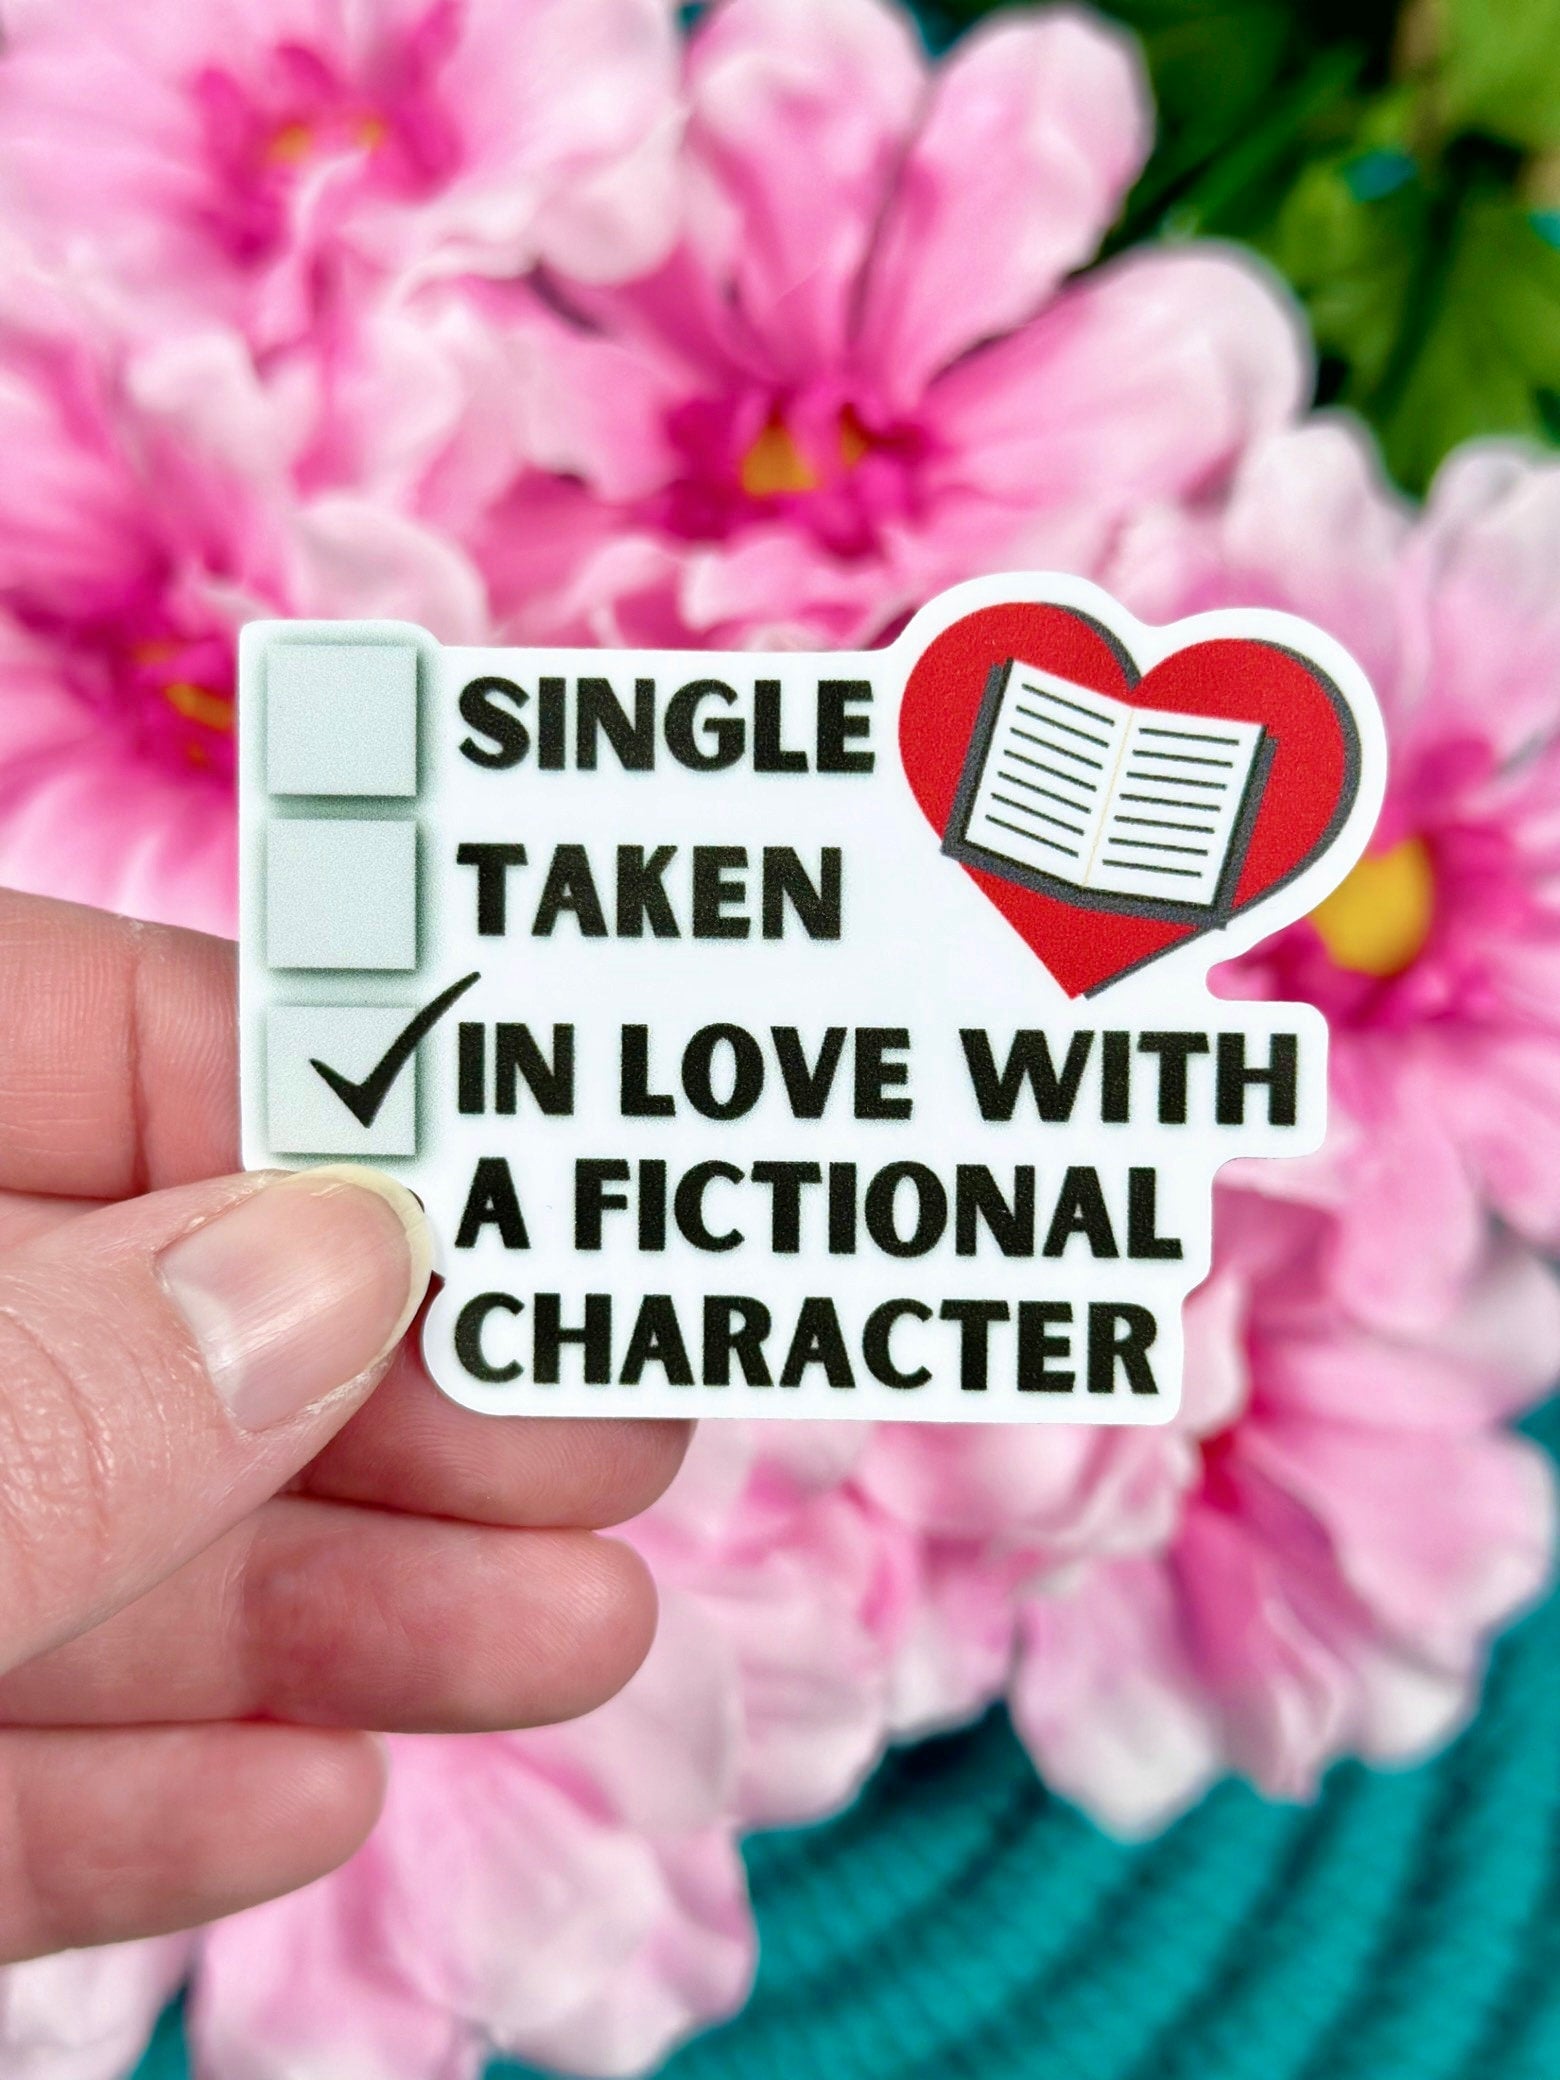 In Love with a Fictional Character Sticker, Book Club Sticker, Vinyl Sticker, Bookish Sticker, Bookish Vinyl Decal, Romance Reader Sticker